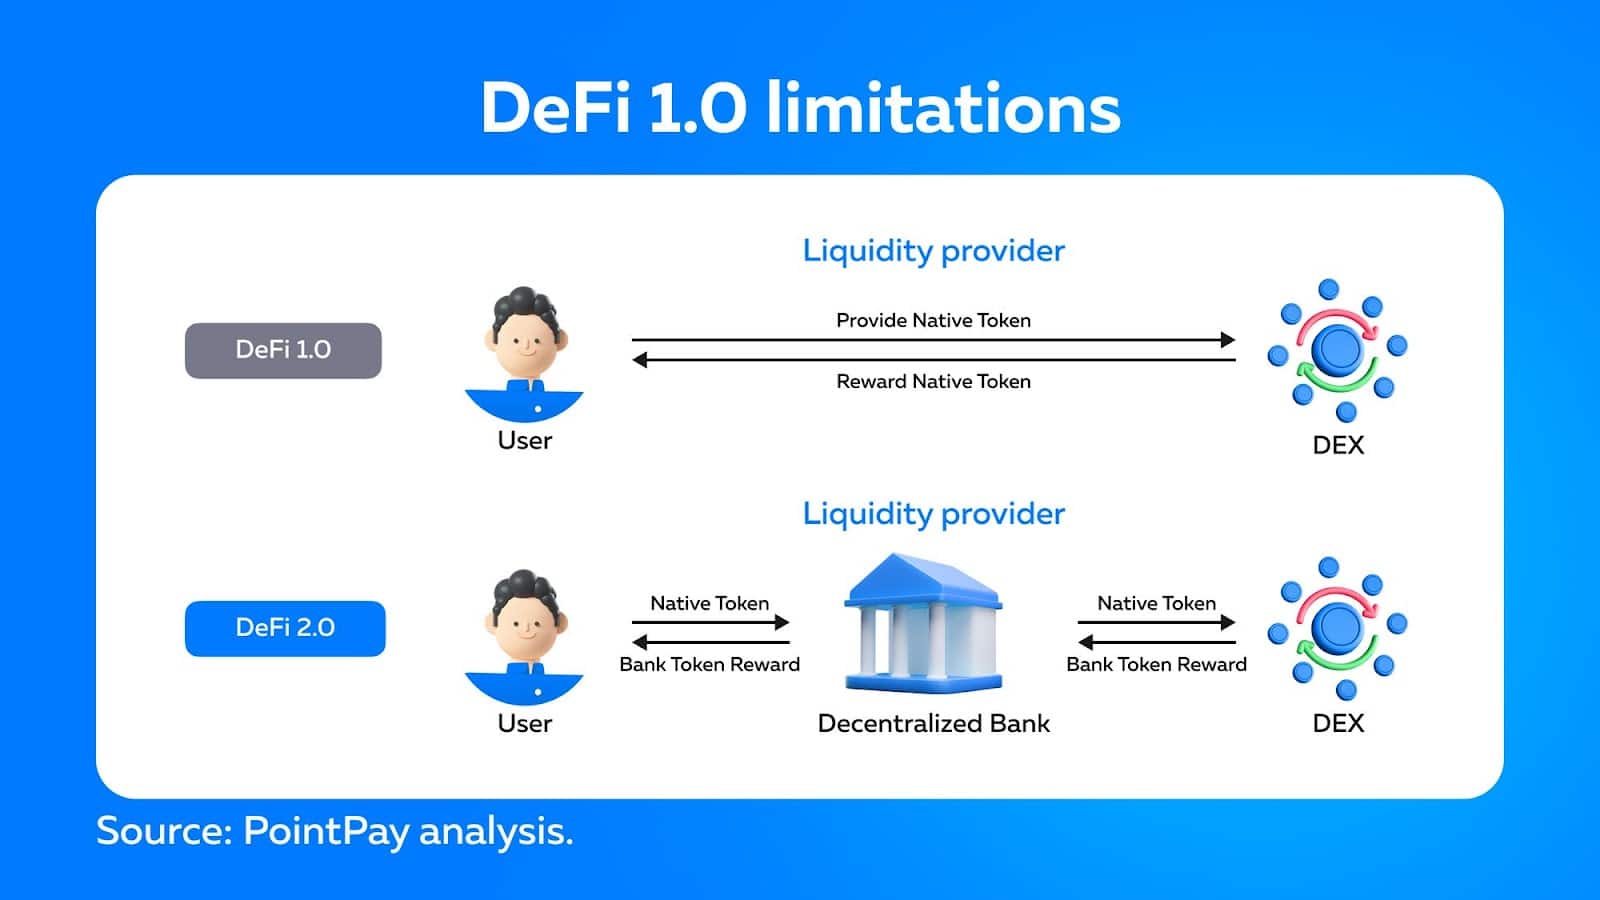 DeFi 2.0 is the upcoming generation of decentralized finance (DeFi) and is characterized by faster, cheaper, and more compliant access to financial services than its predecessor.